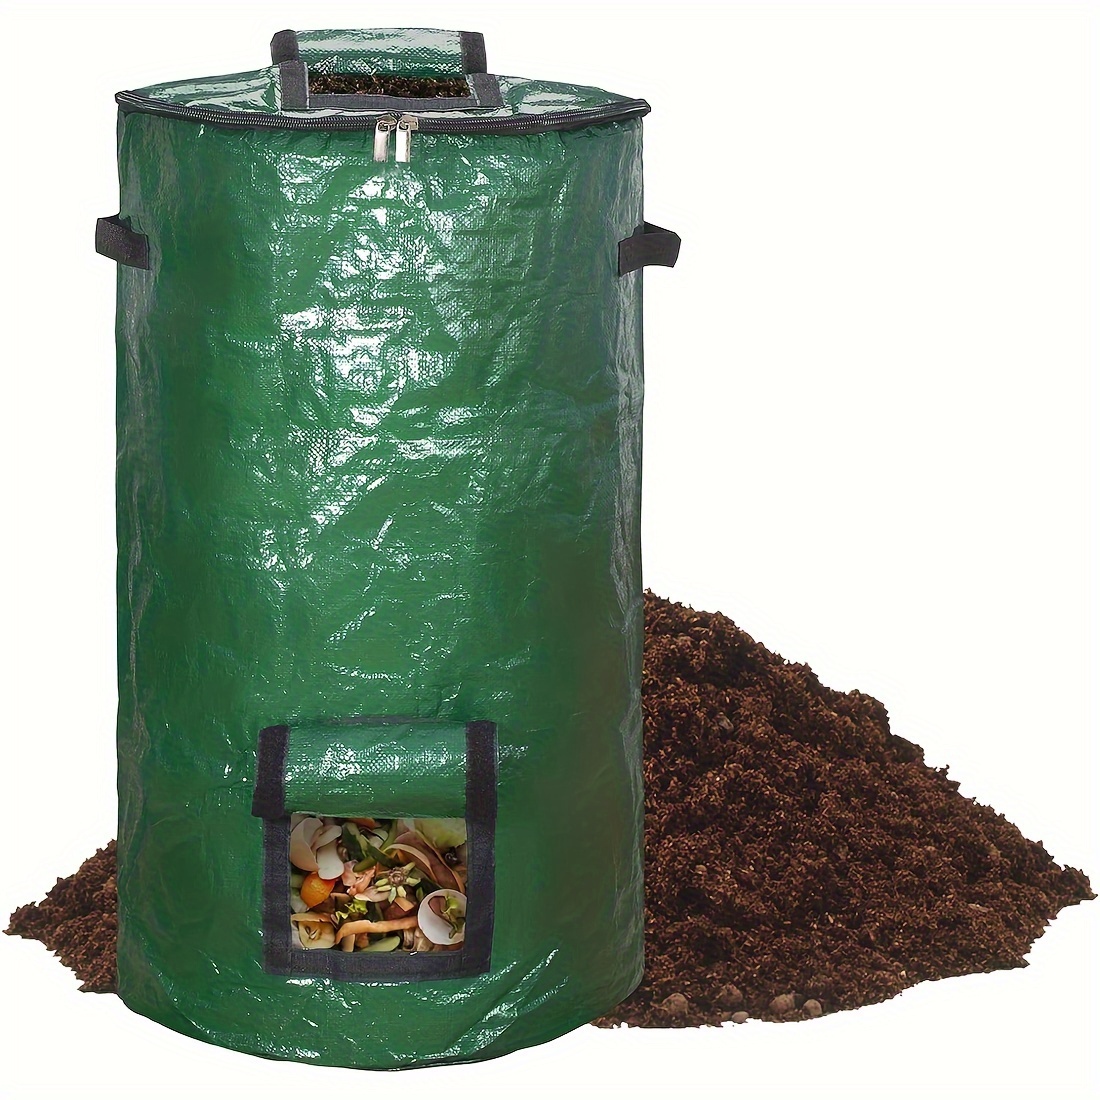 

1pc 34 Gallon Compost Bag With Zippered Lid And Handles, Reusable Garden Yard Waste Bag, Outdoor Container, Rustic Green Heavy-duty Composting Garden Garbage Bag